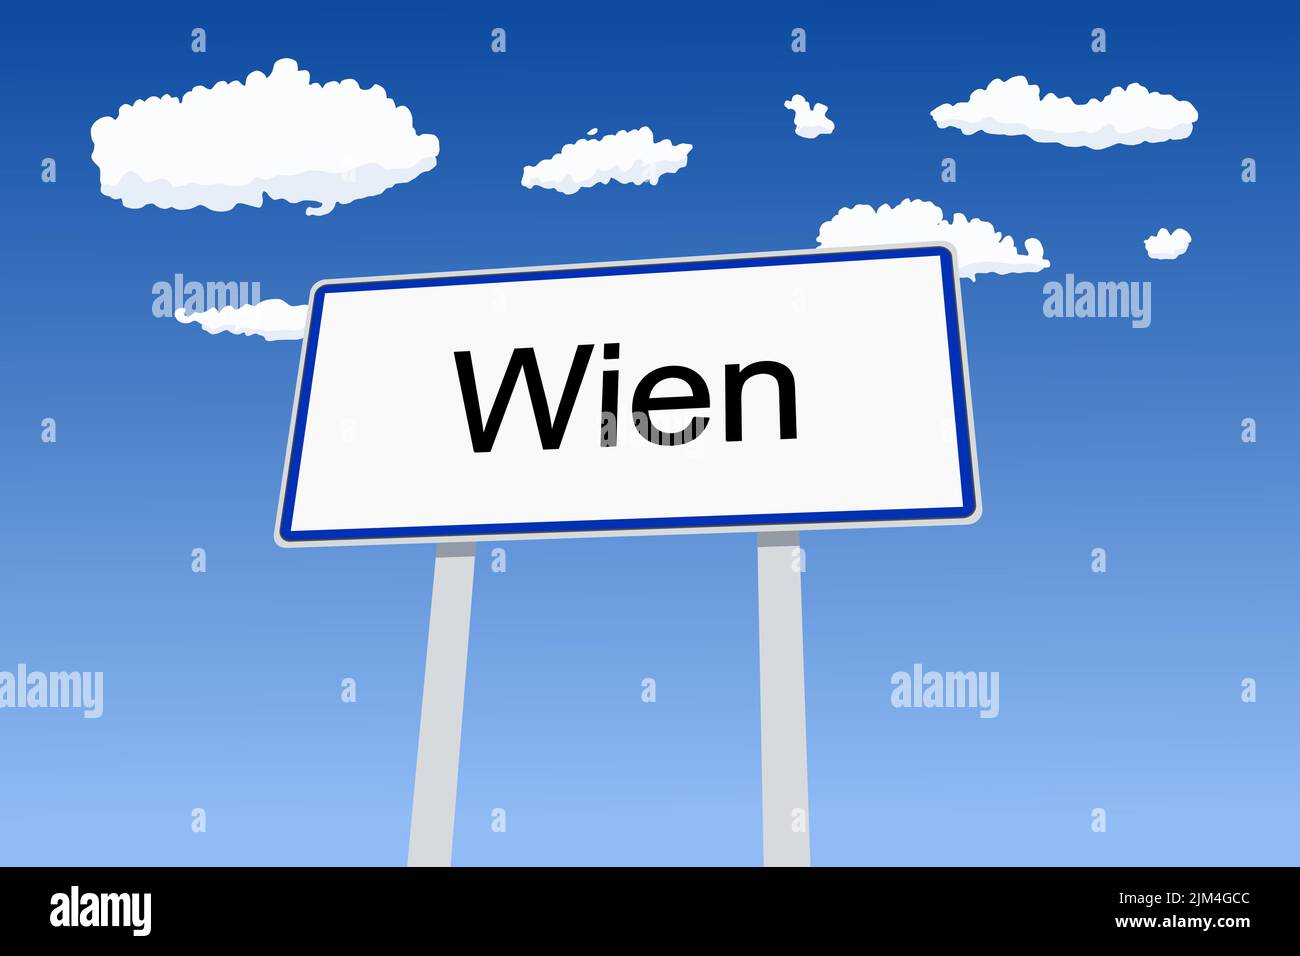 Vienna (Wien) city sign in Austria. City name welcome road sign vector illustration. Stock Vector